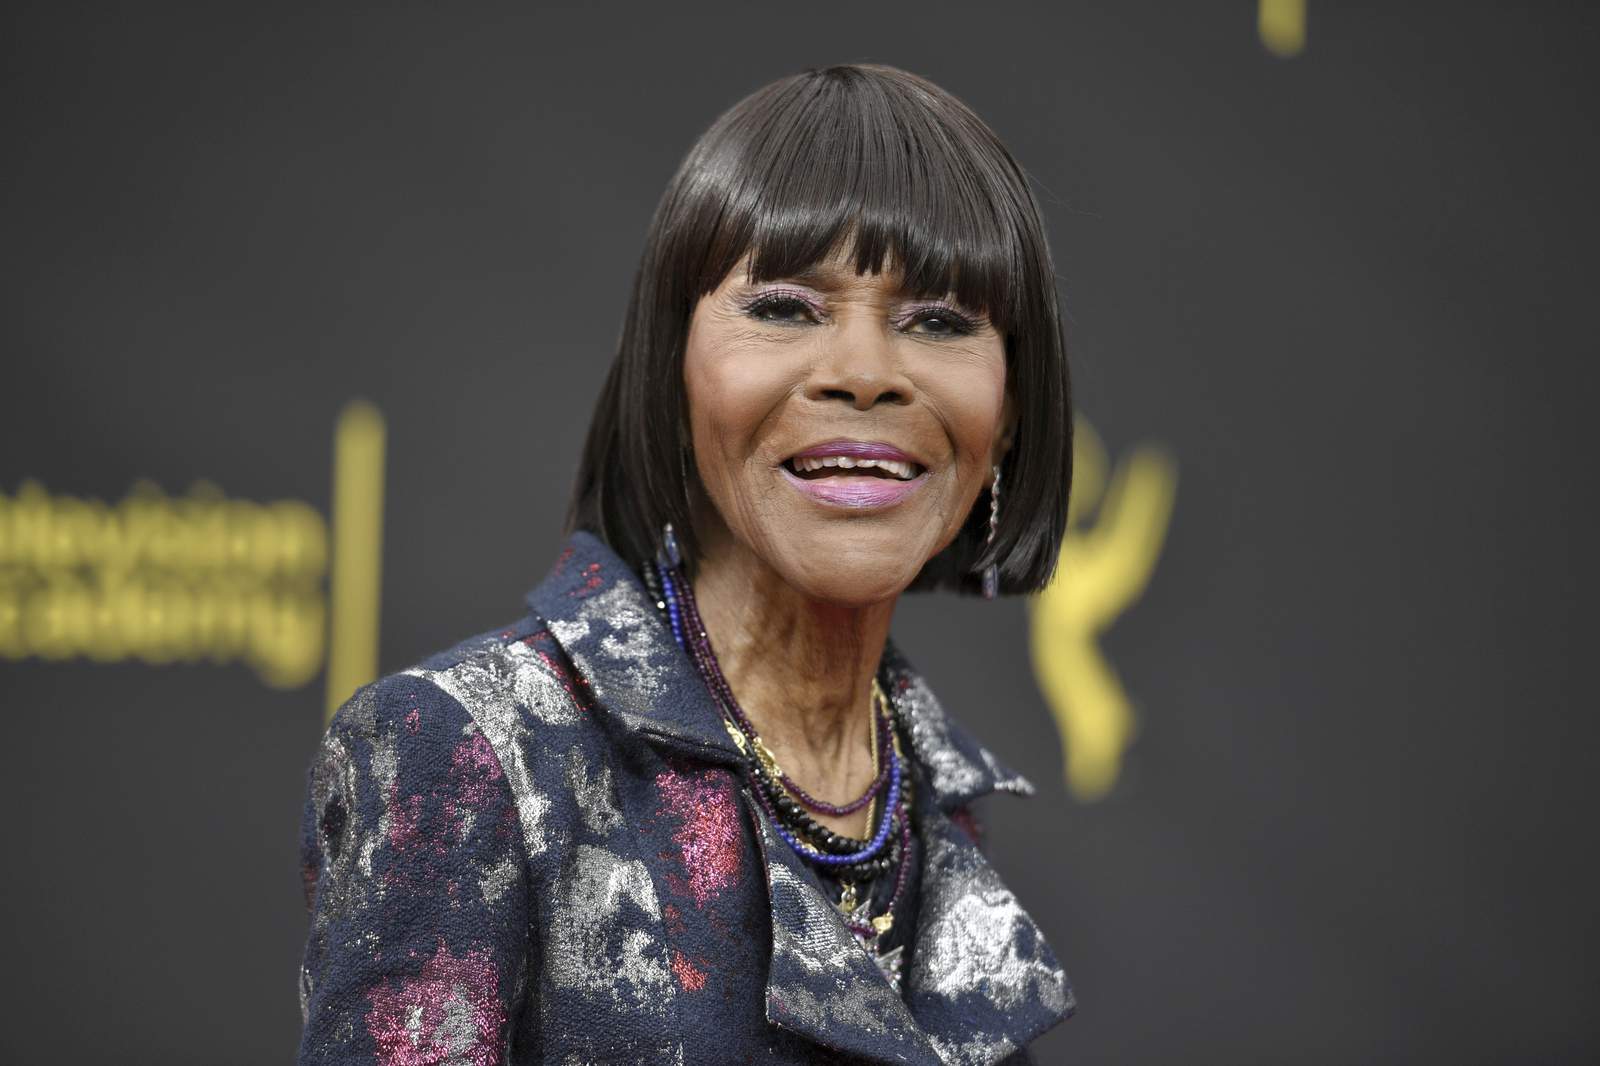 Cicely Tyson, groundbreaking actress, dies at 96